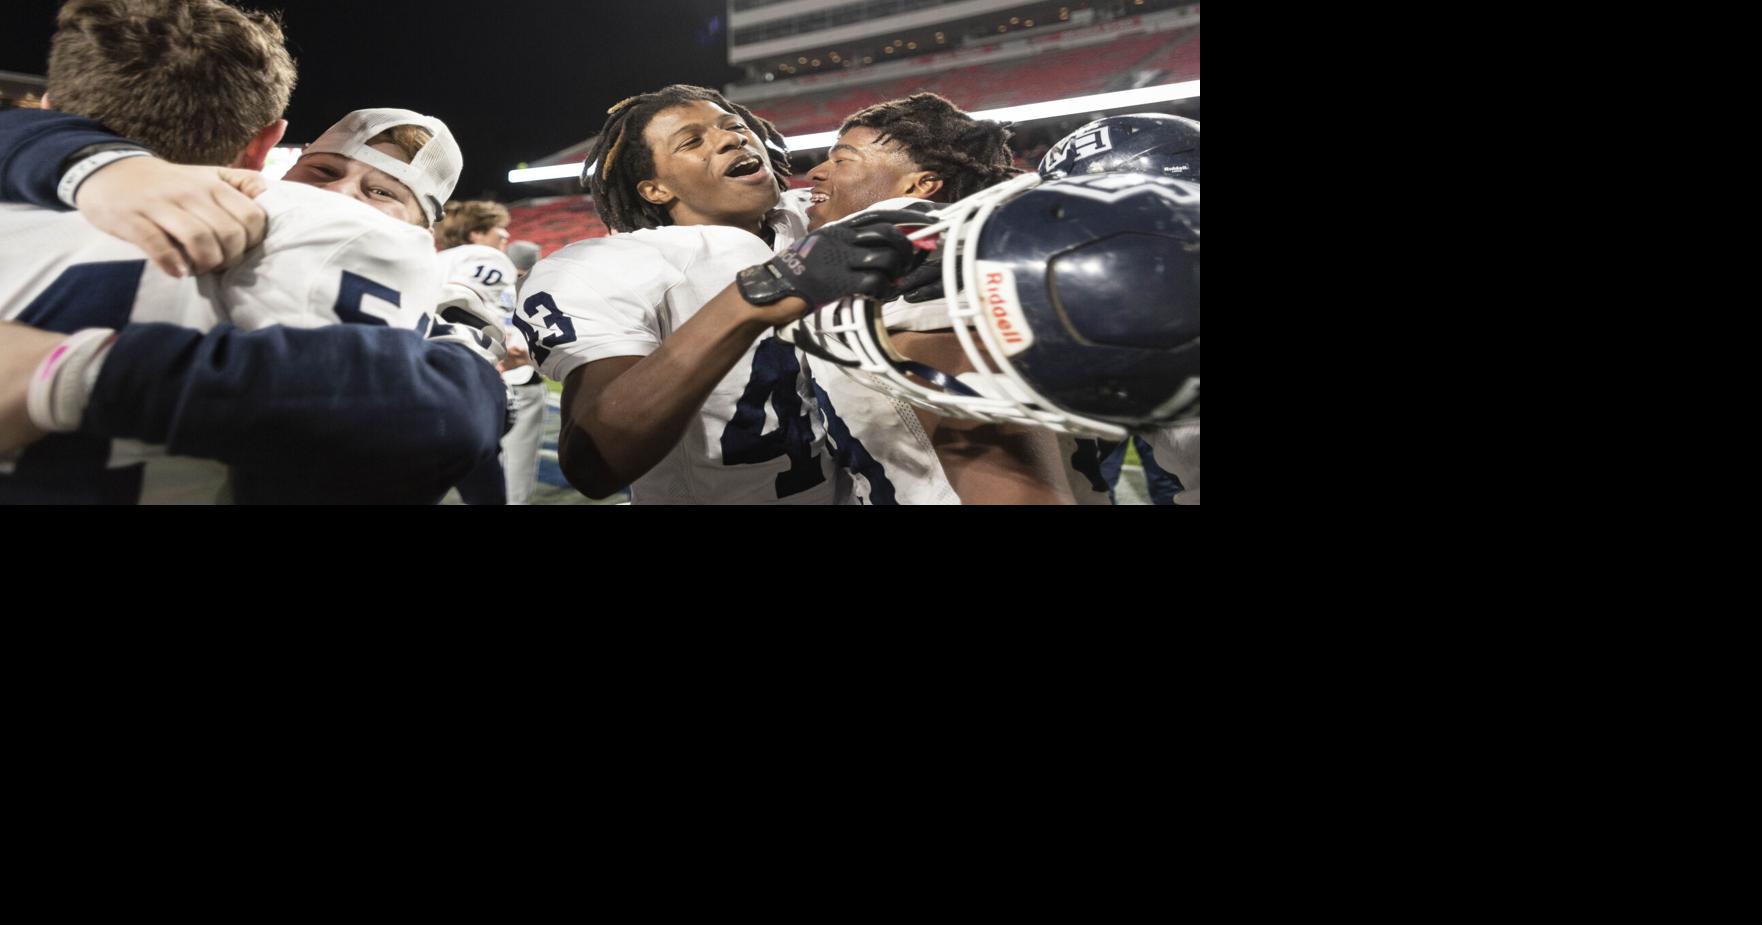 Mount Airy wins 1A State Championship, Sports